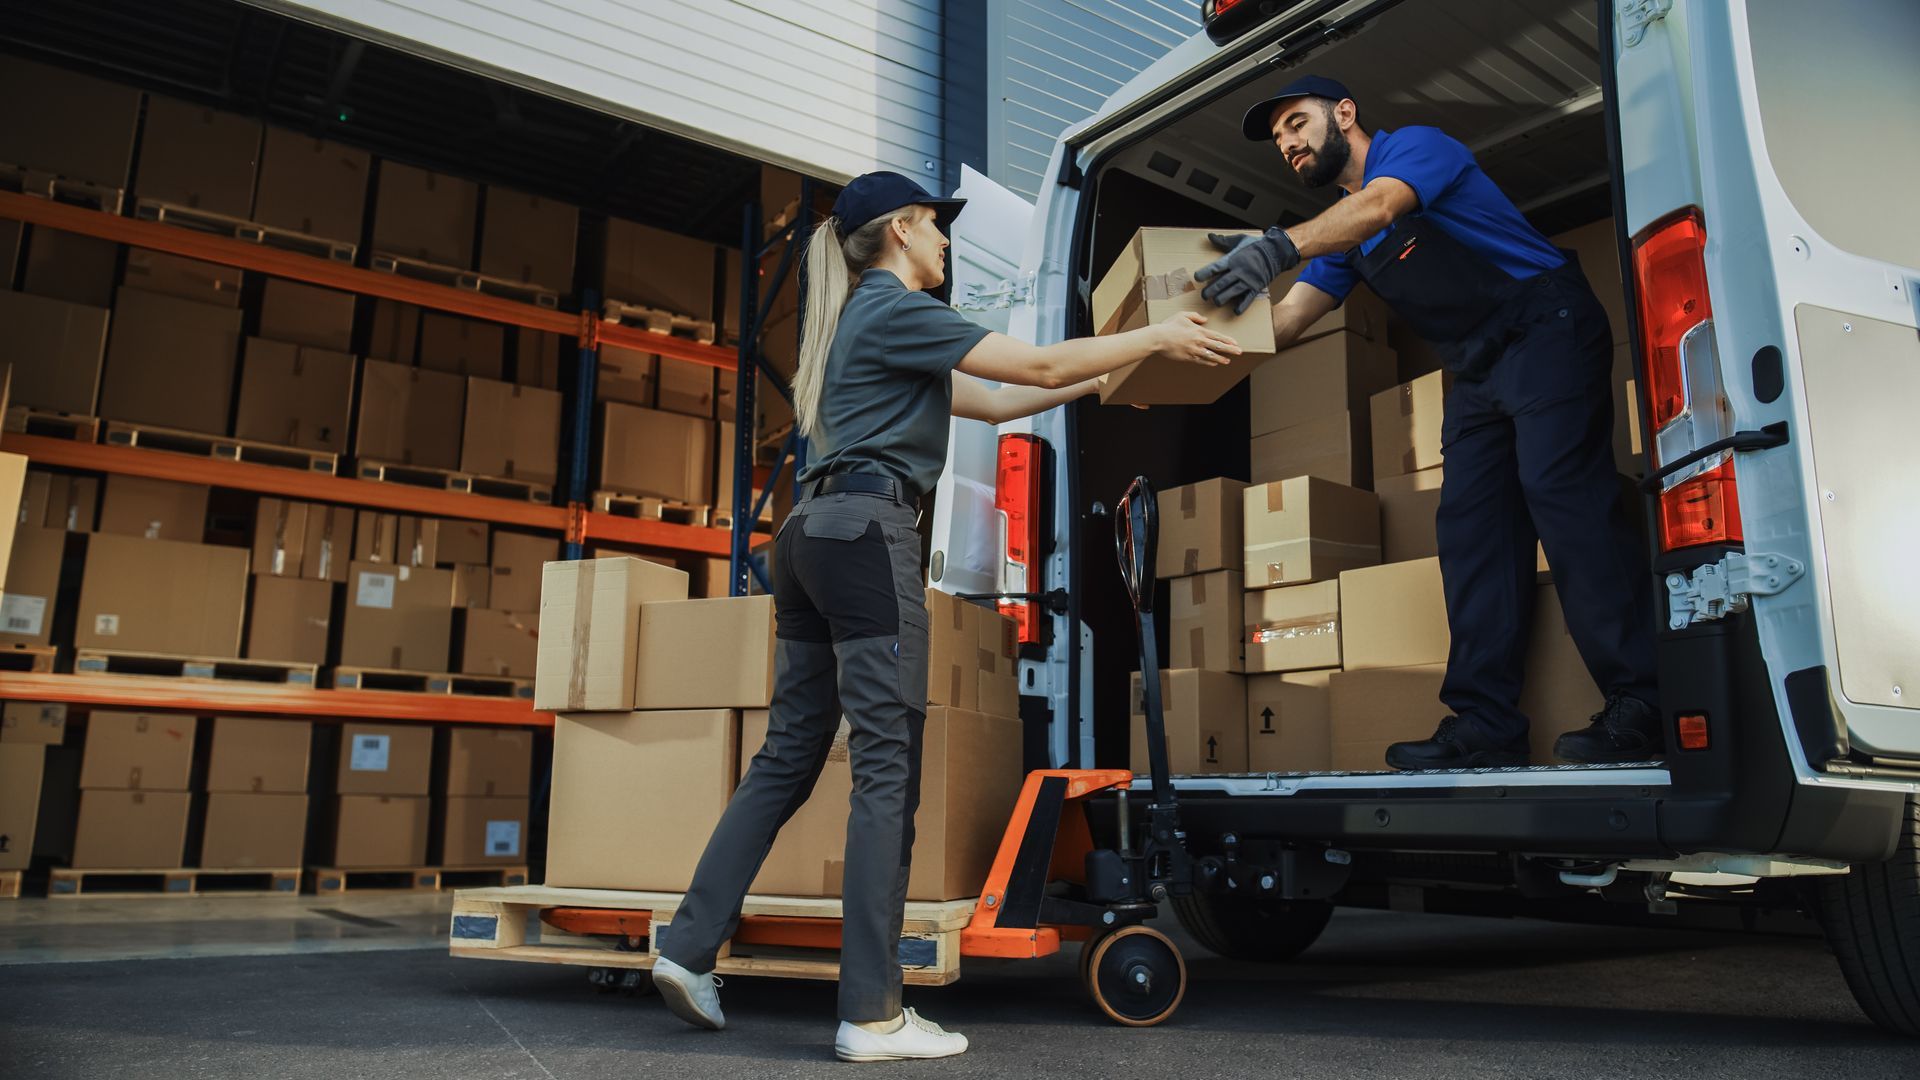 Outside of Logistics Distributions Warehouse: Diverse Team of Workers use Hand Truck Loading Delivery Van with Cardboard Boxes